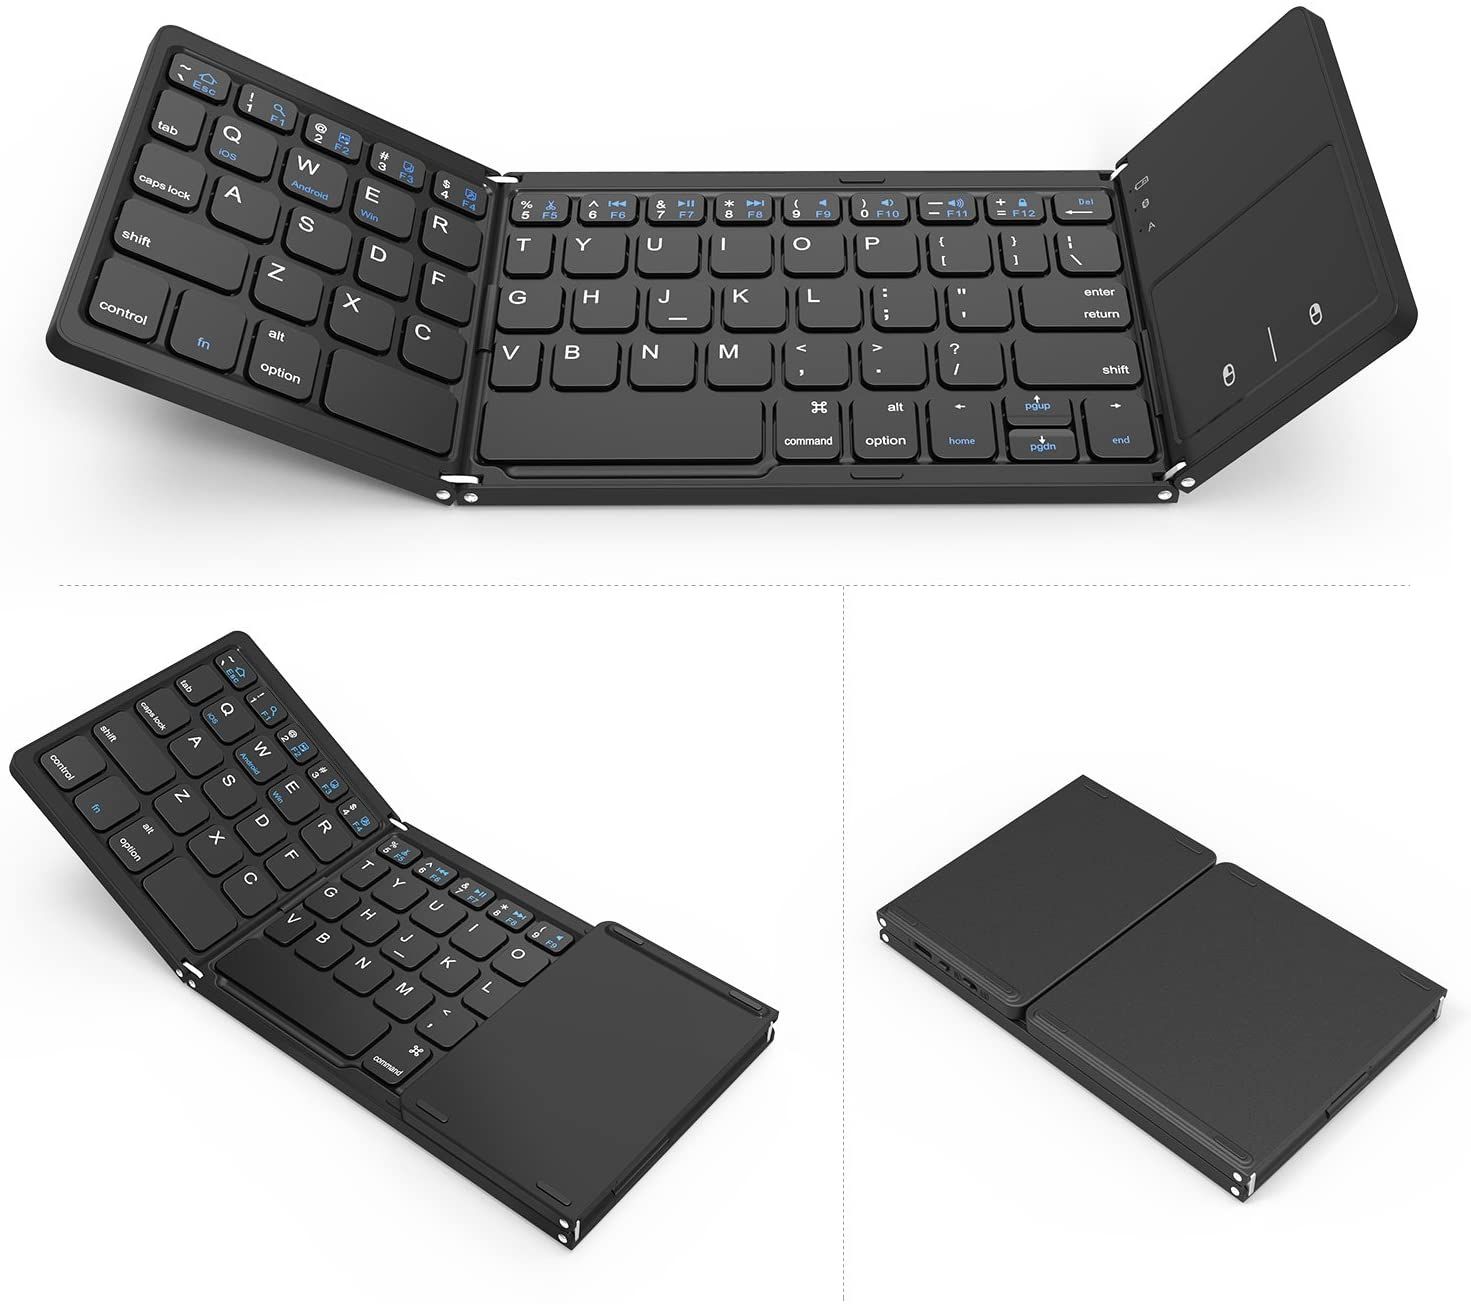 Tek Styz Foldable Bluetooth Keyboard Works for Kyocera Hydro View Dual Mode Bluetooth & USB Wired Rechargable Portable Mini BT Wireless Keyboard with Touchpad Mouse! 